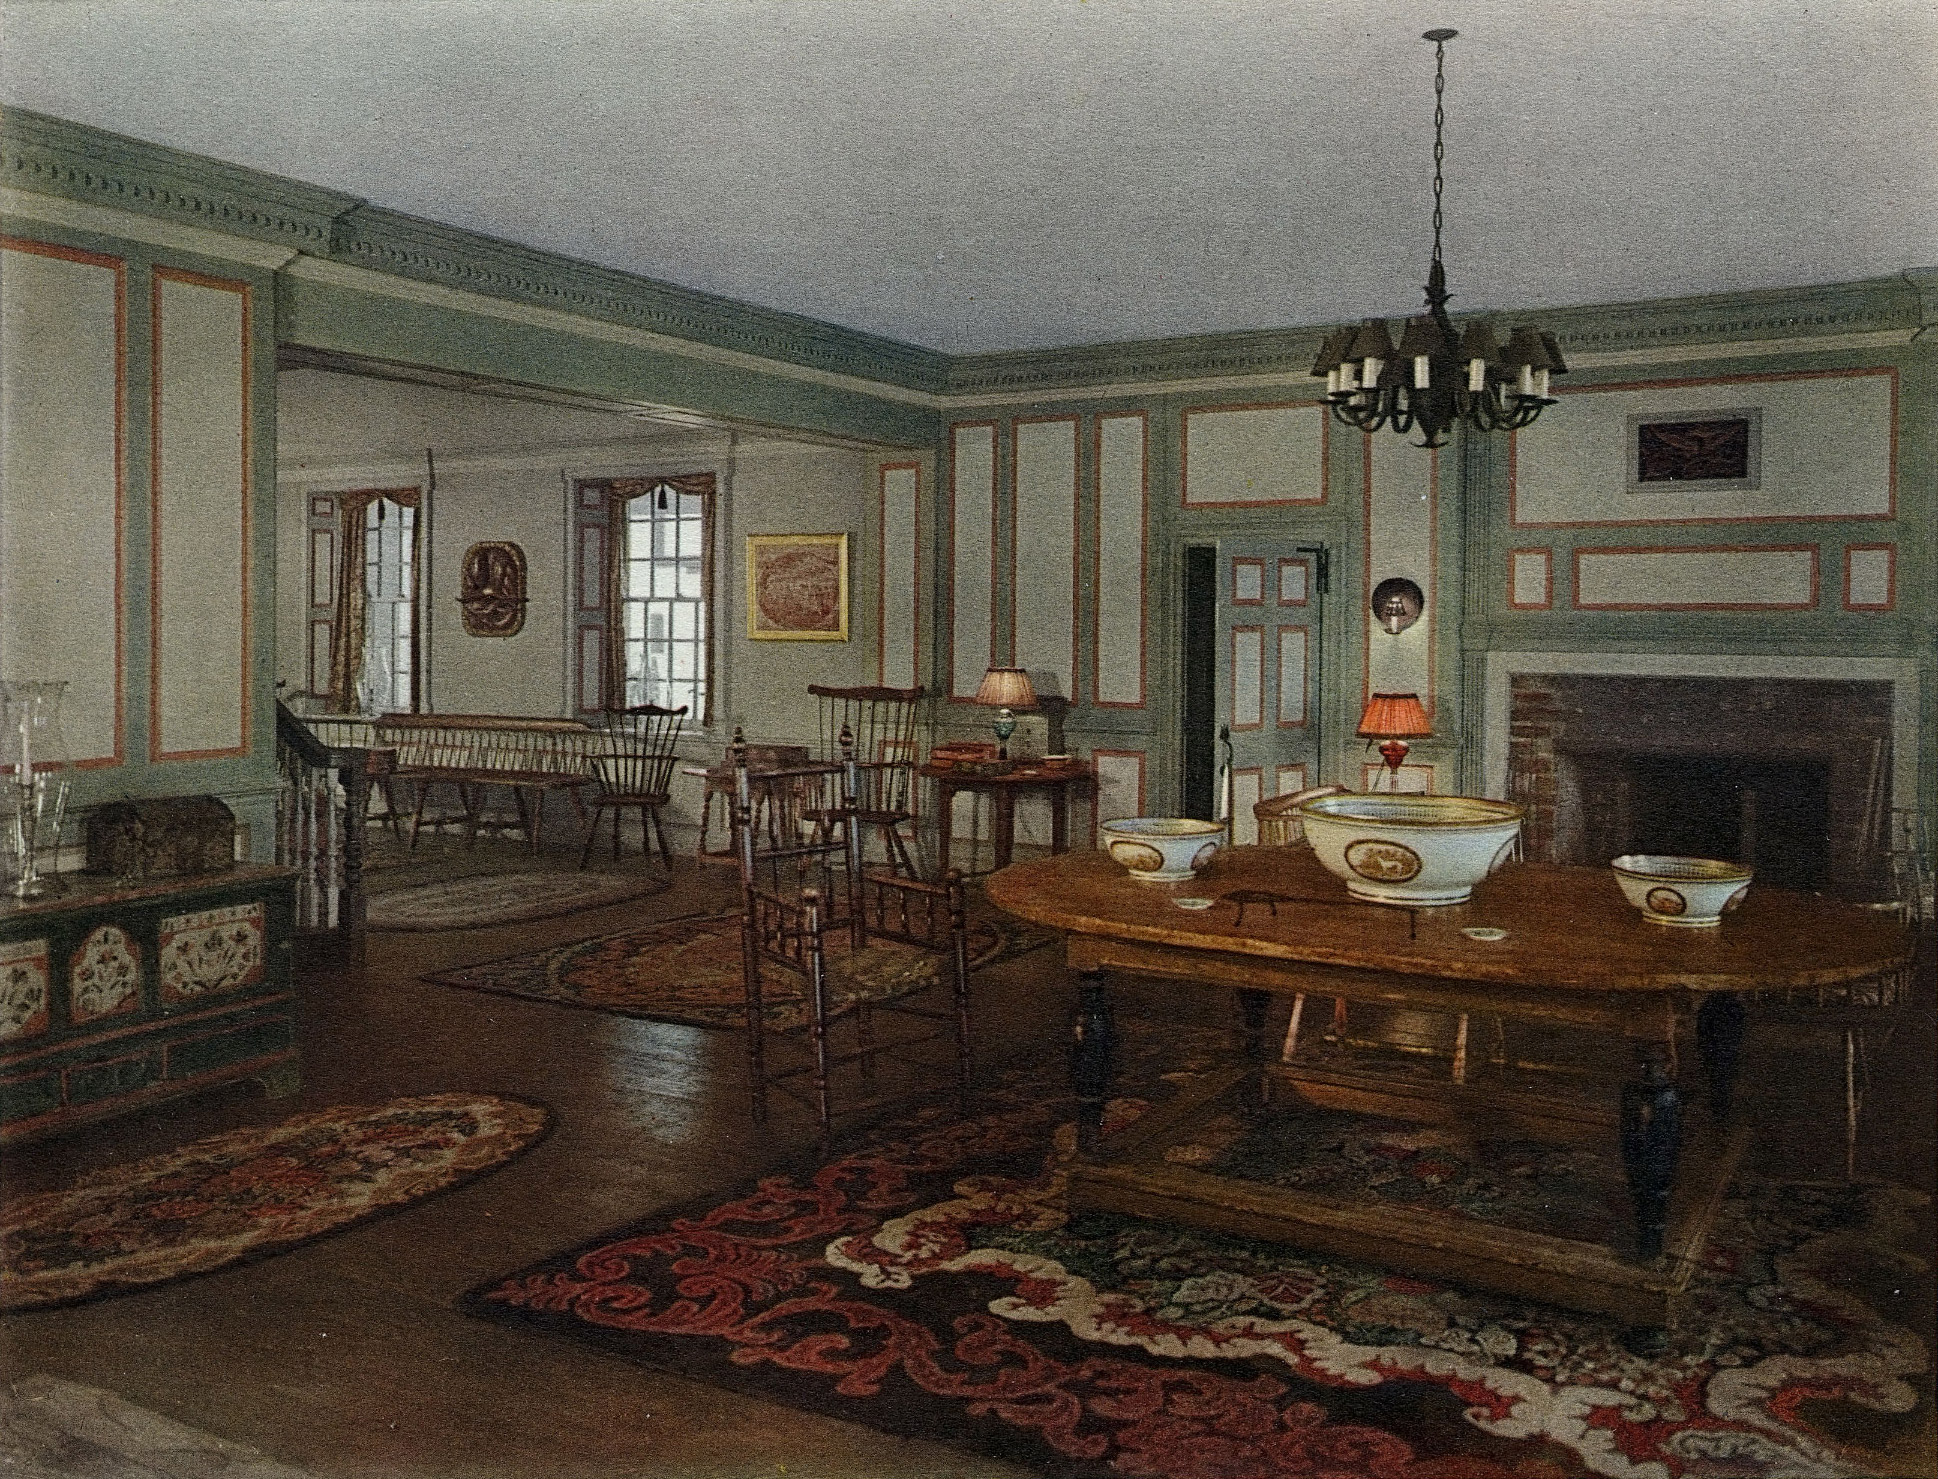 Entrance Hall, Chestertown House, 1927